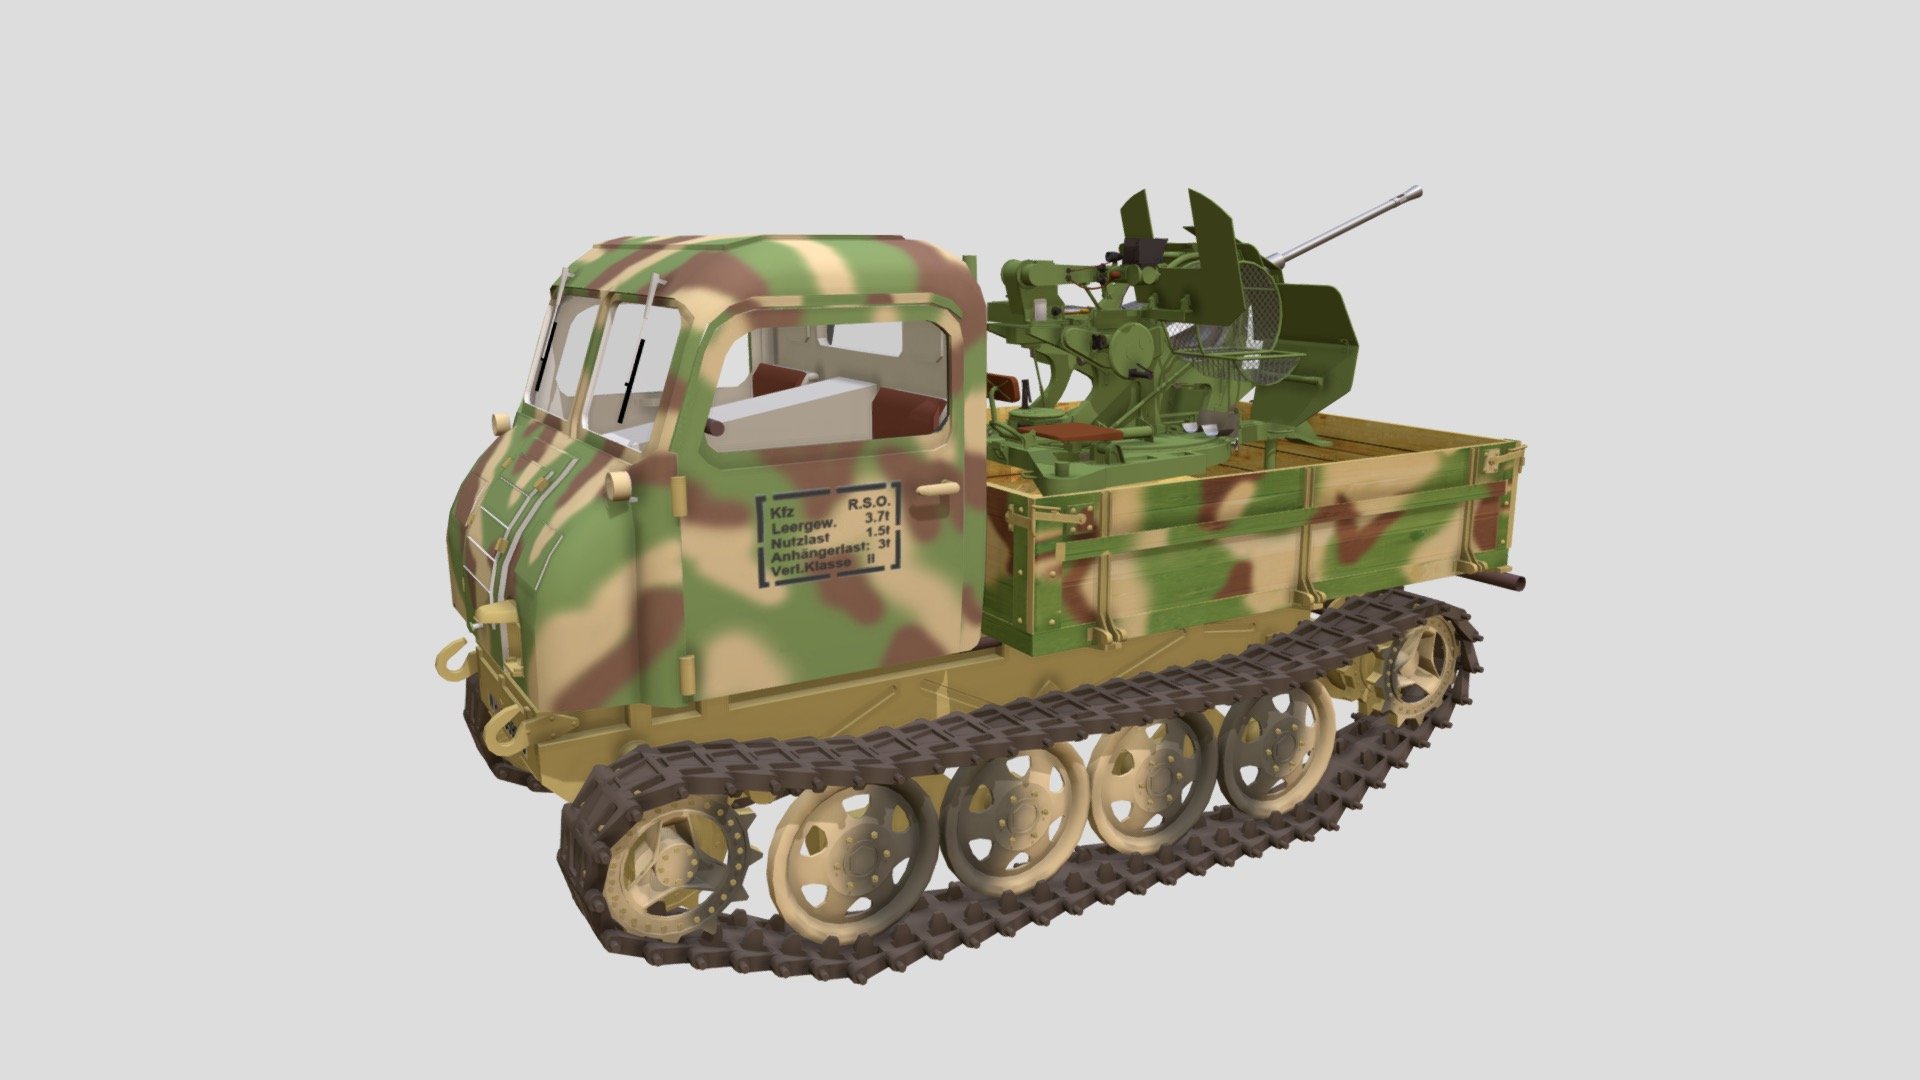 Raupenschlepper Ost (German: “Caterpillar Tractor East”, more commonly abbreviated to RSO) was a fully tracked, lightweight vehicle used by the Wehrmacht in World War II.

二戰德國東線全地形載重牽引車，安裝Flak 38防空炮的版本，製作R.S.O.載重車的系列作之一。 - Steyr RSO mit Flak 38 - 3D model by Basic Hsu (@Hsu.Pei.Ge) 3d model